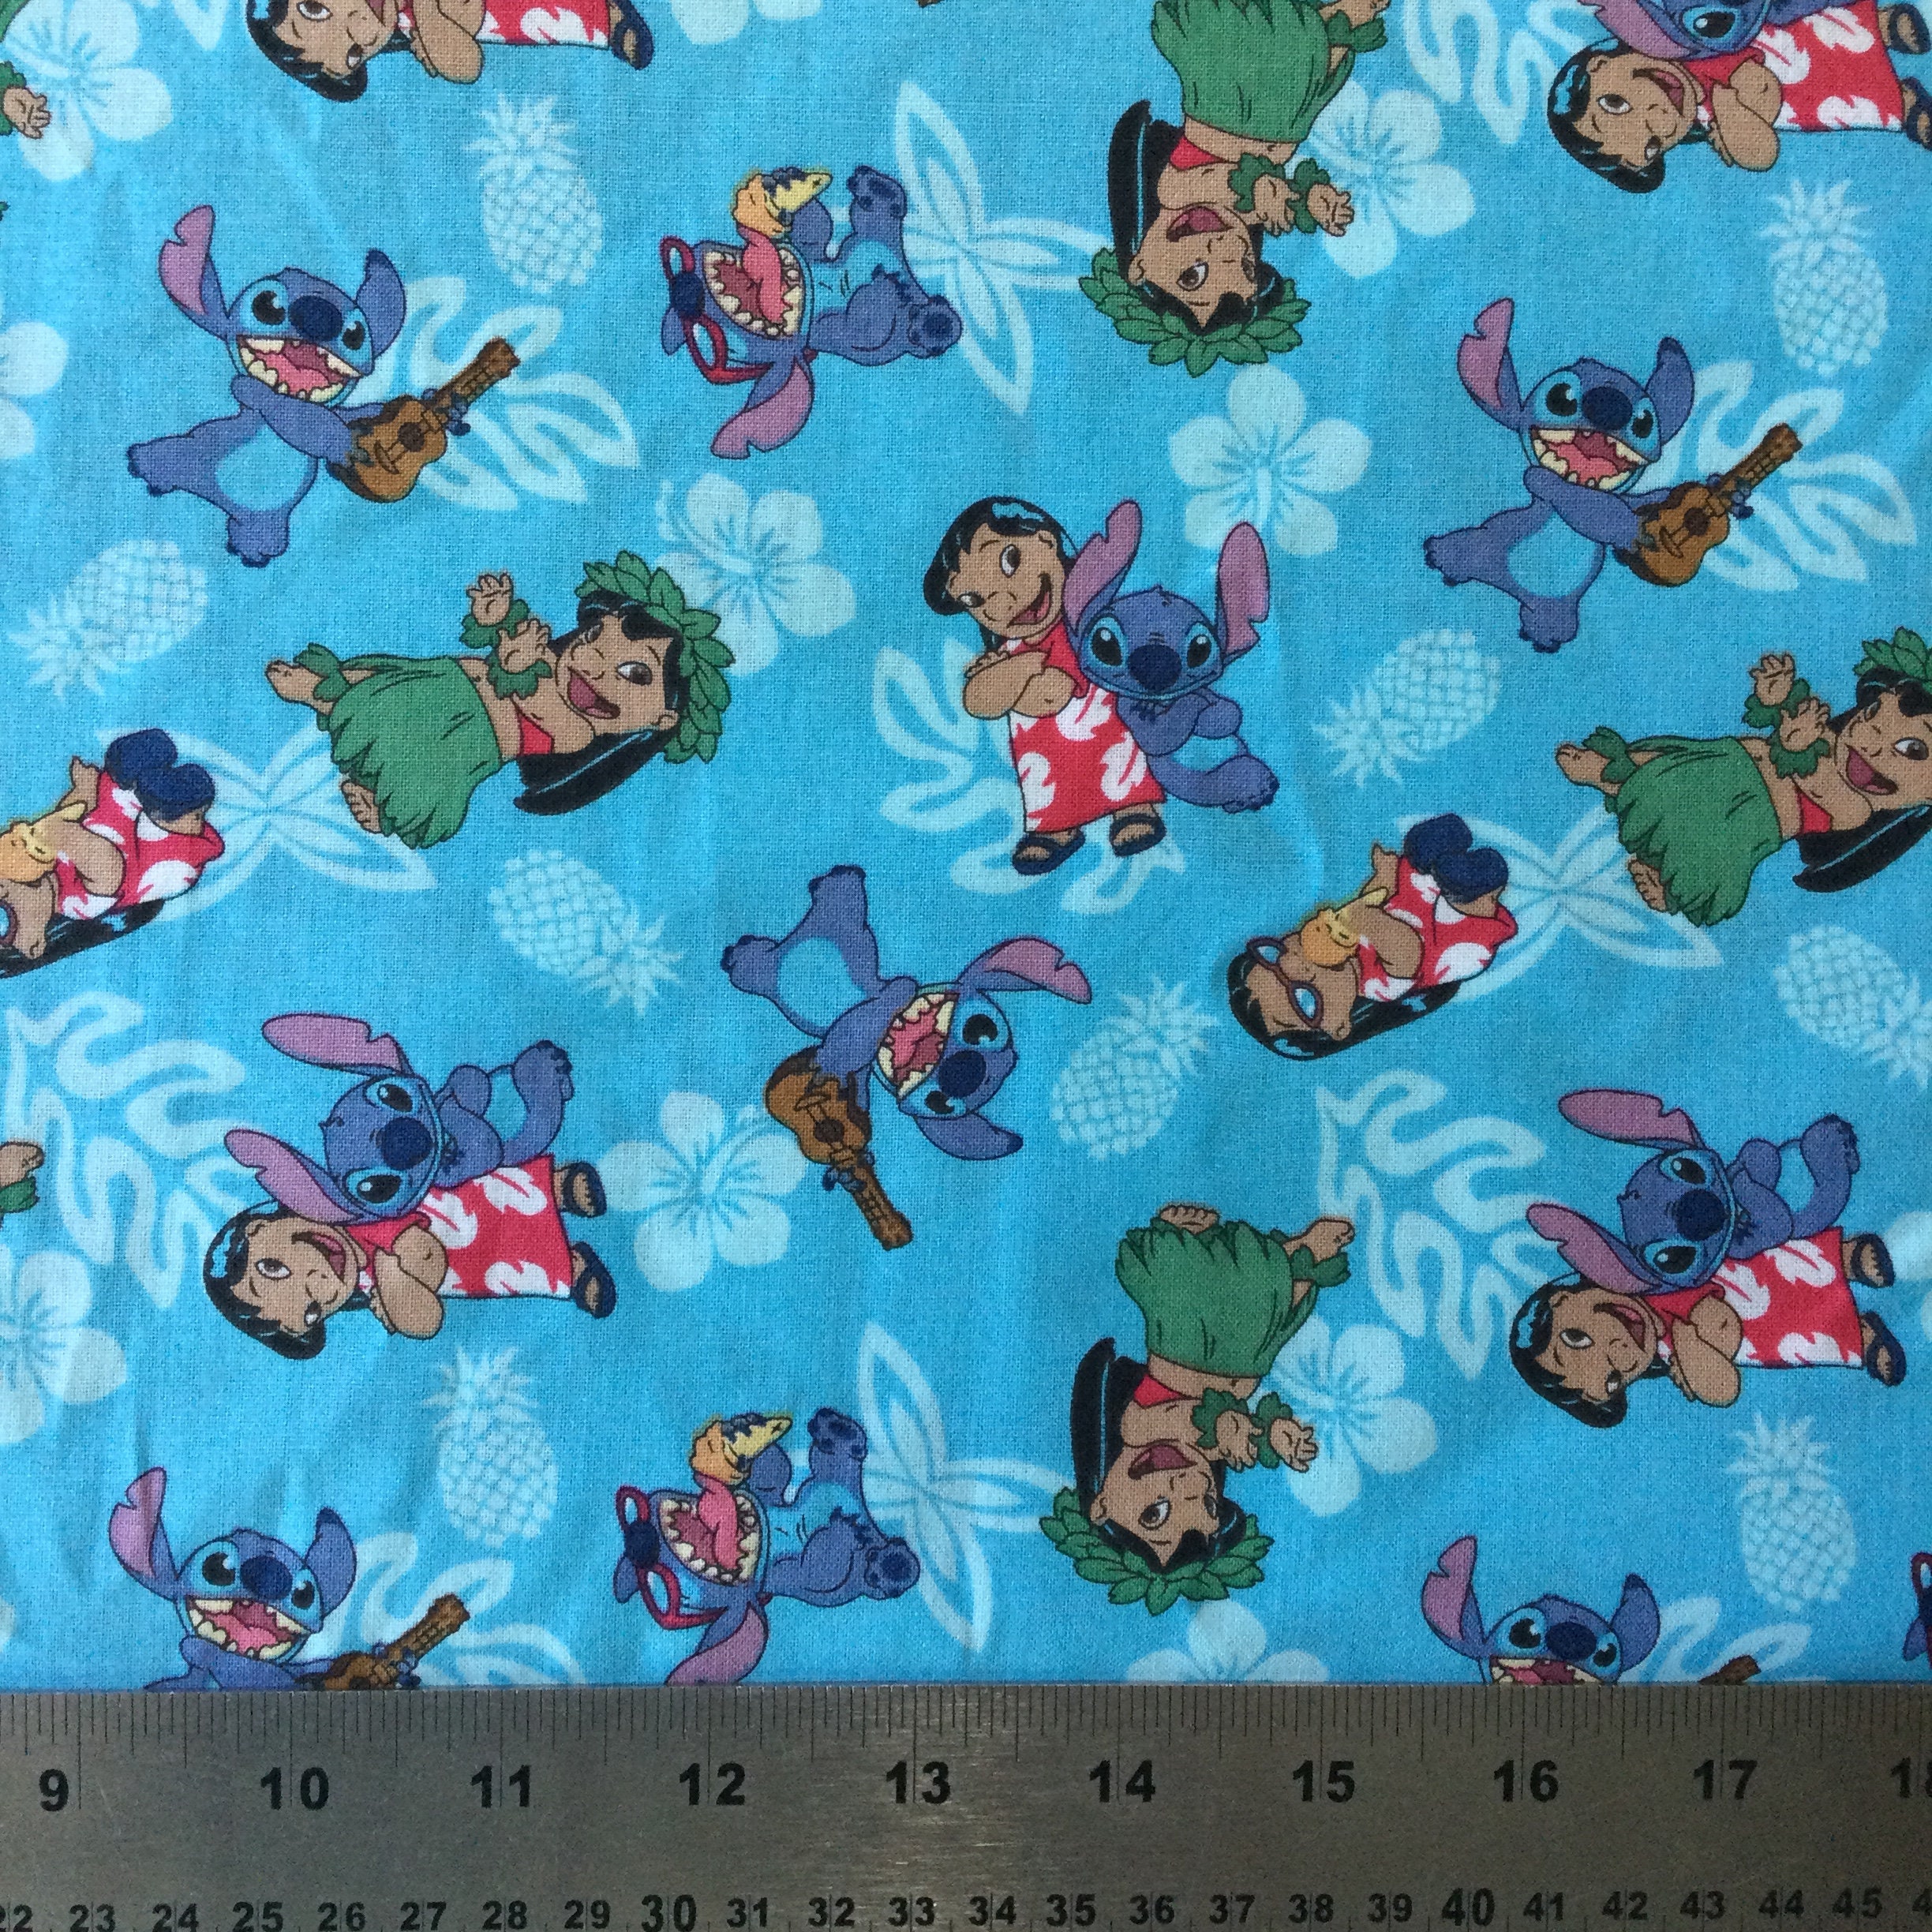 Lilo and Stitch Character Fabric | Etsy